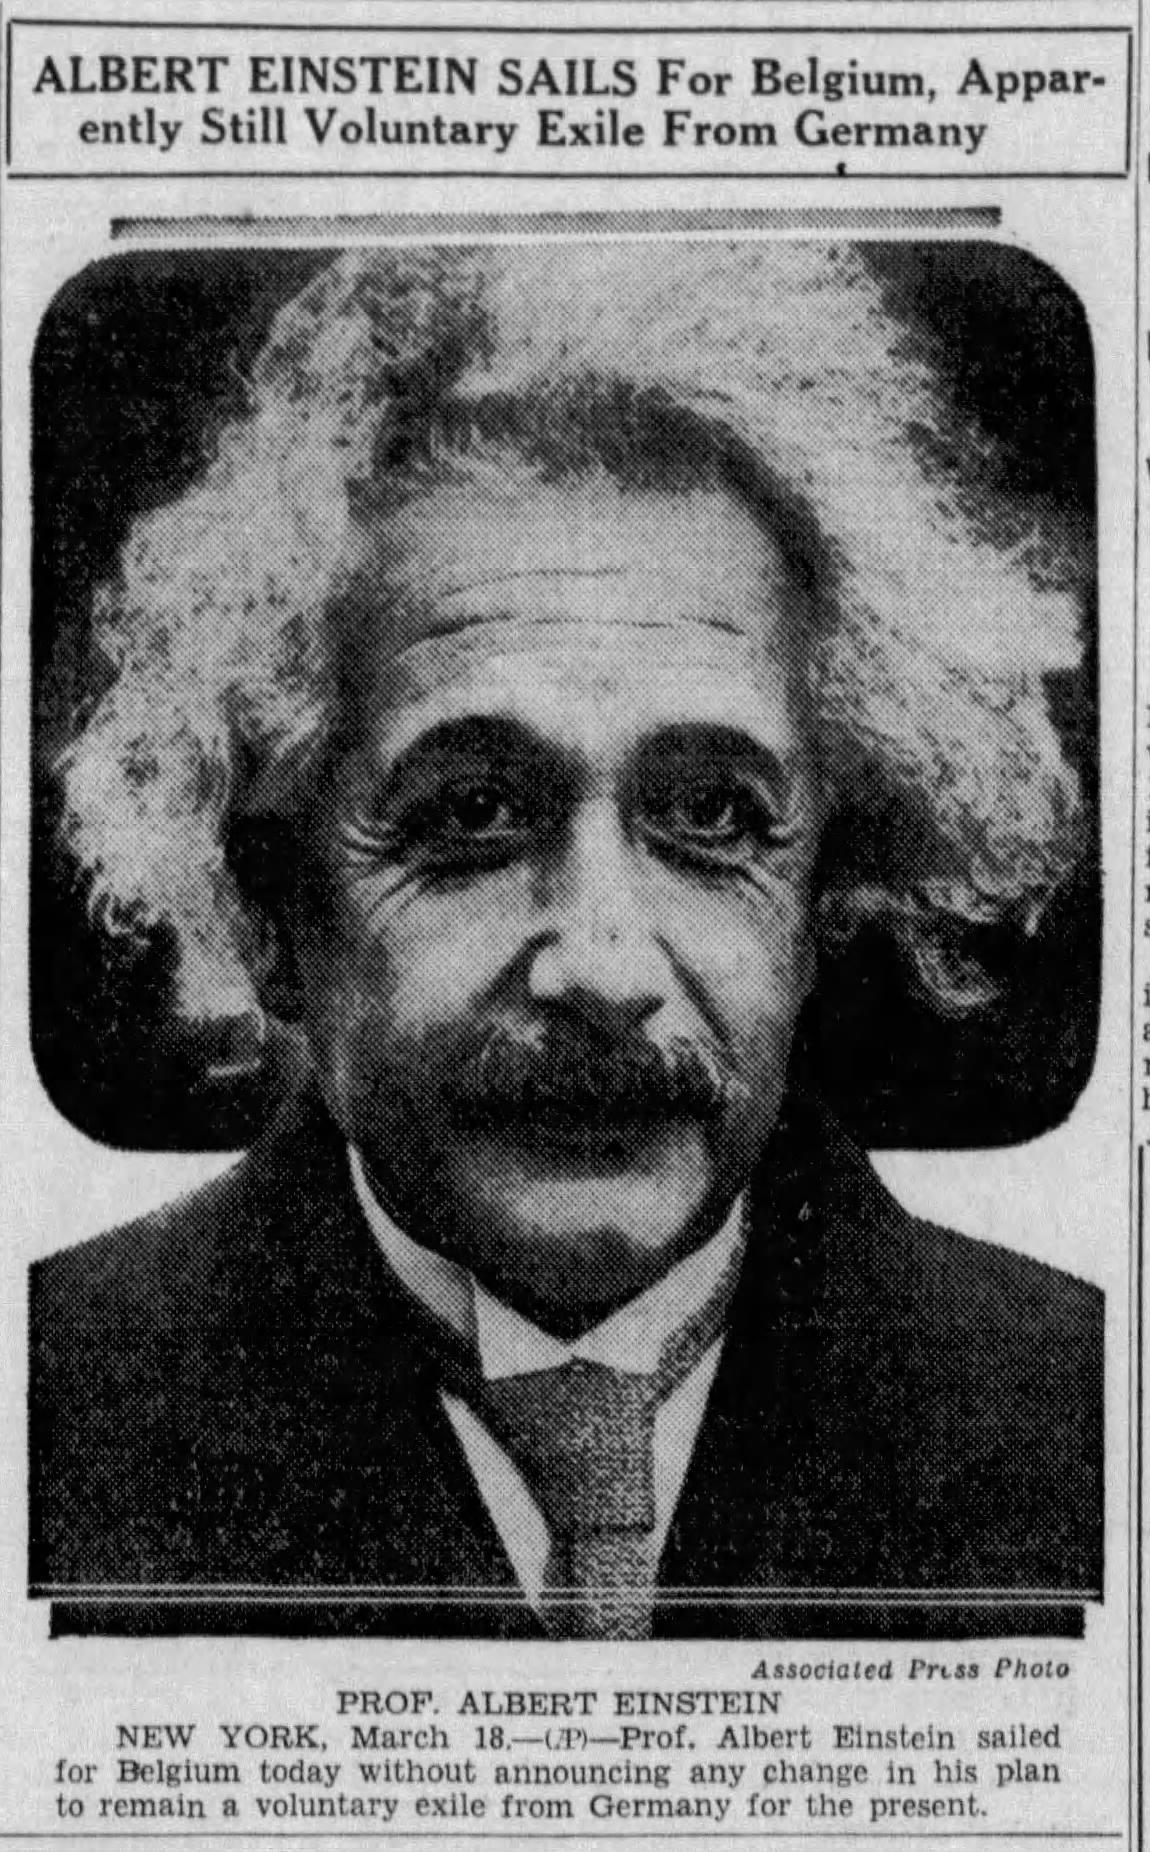 Albert Einstein Sails For Belgium, Apparently Still Voluntary Exile From Germany